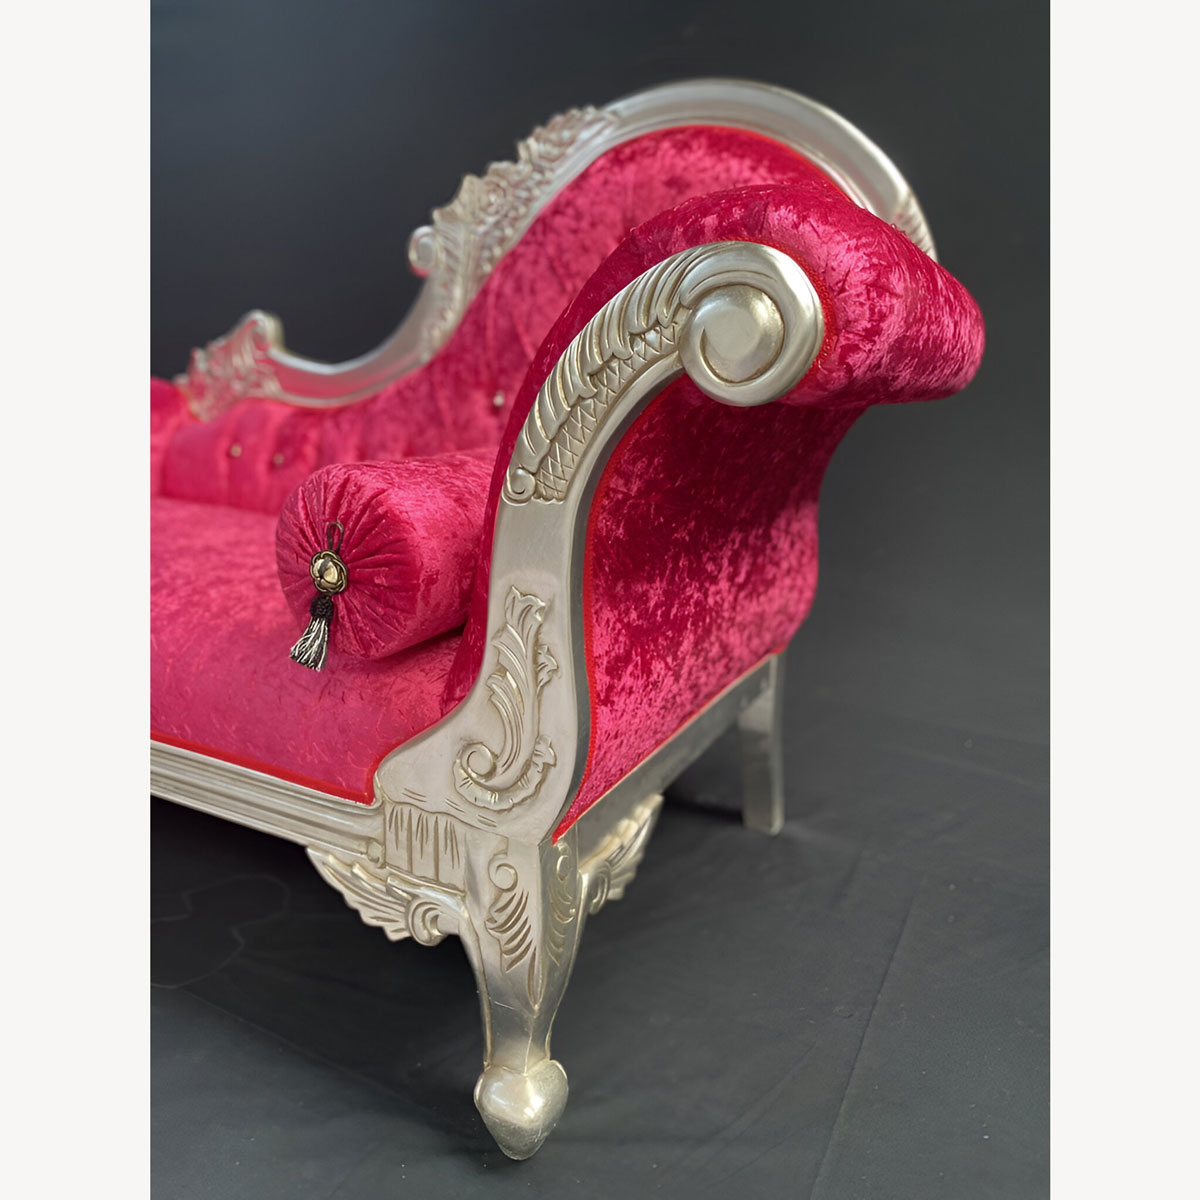 Chaise Hampshire Sofa In Silver Leaf Frame Upholstered In Fuchsia Pink Crushed Velvet With Crystal Buttoning 2 - Hampshire Barn Interiors - Chaise Hampshire Sofa In Silver Leaf Frame Upholstered In Fuchsia Pink Crushed Velvet With Crystal Buttoning -